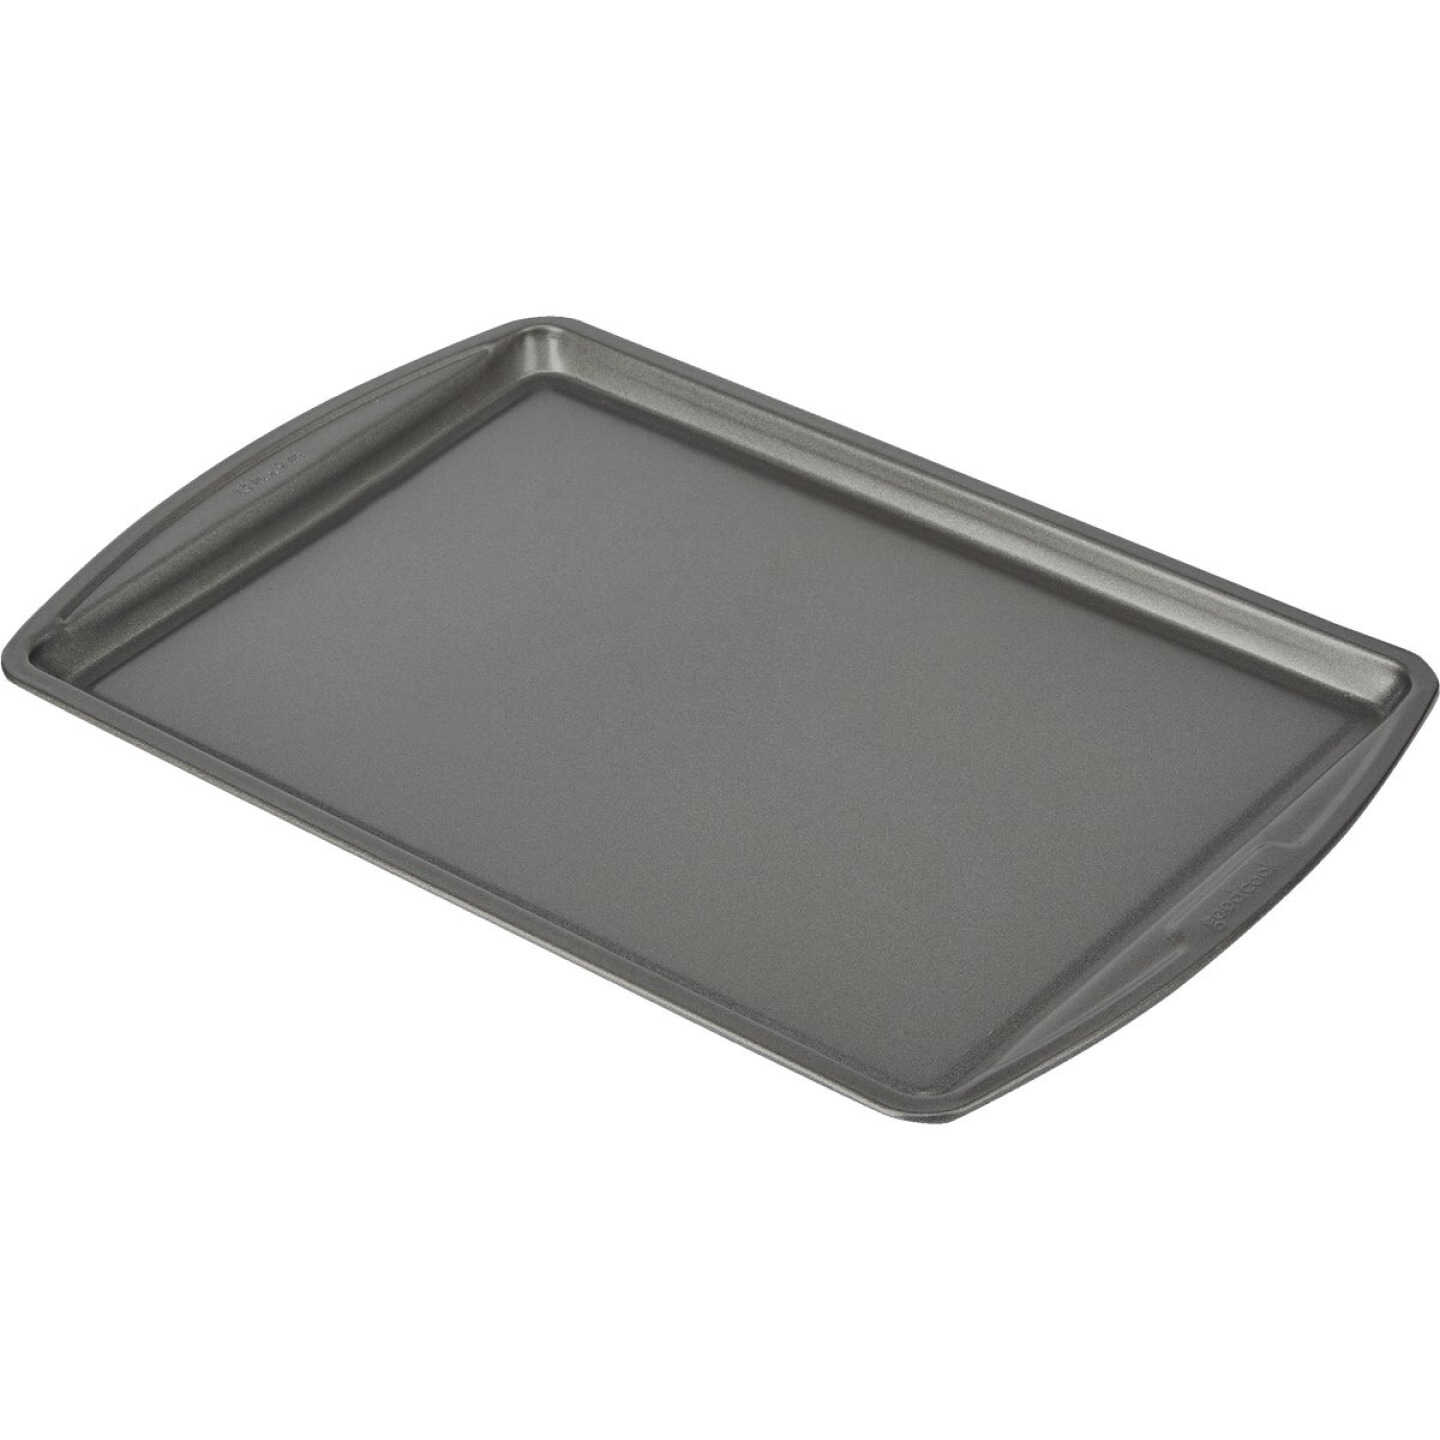 Goodcook 13 In. x 9 In. Non-Stick Cookie Sheet - McCabe Do it Center